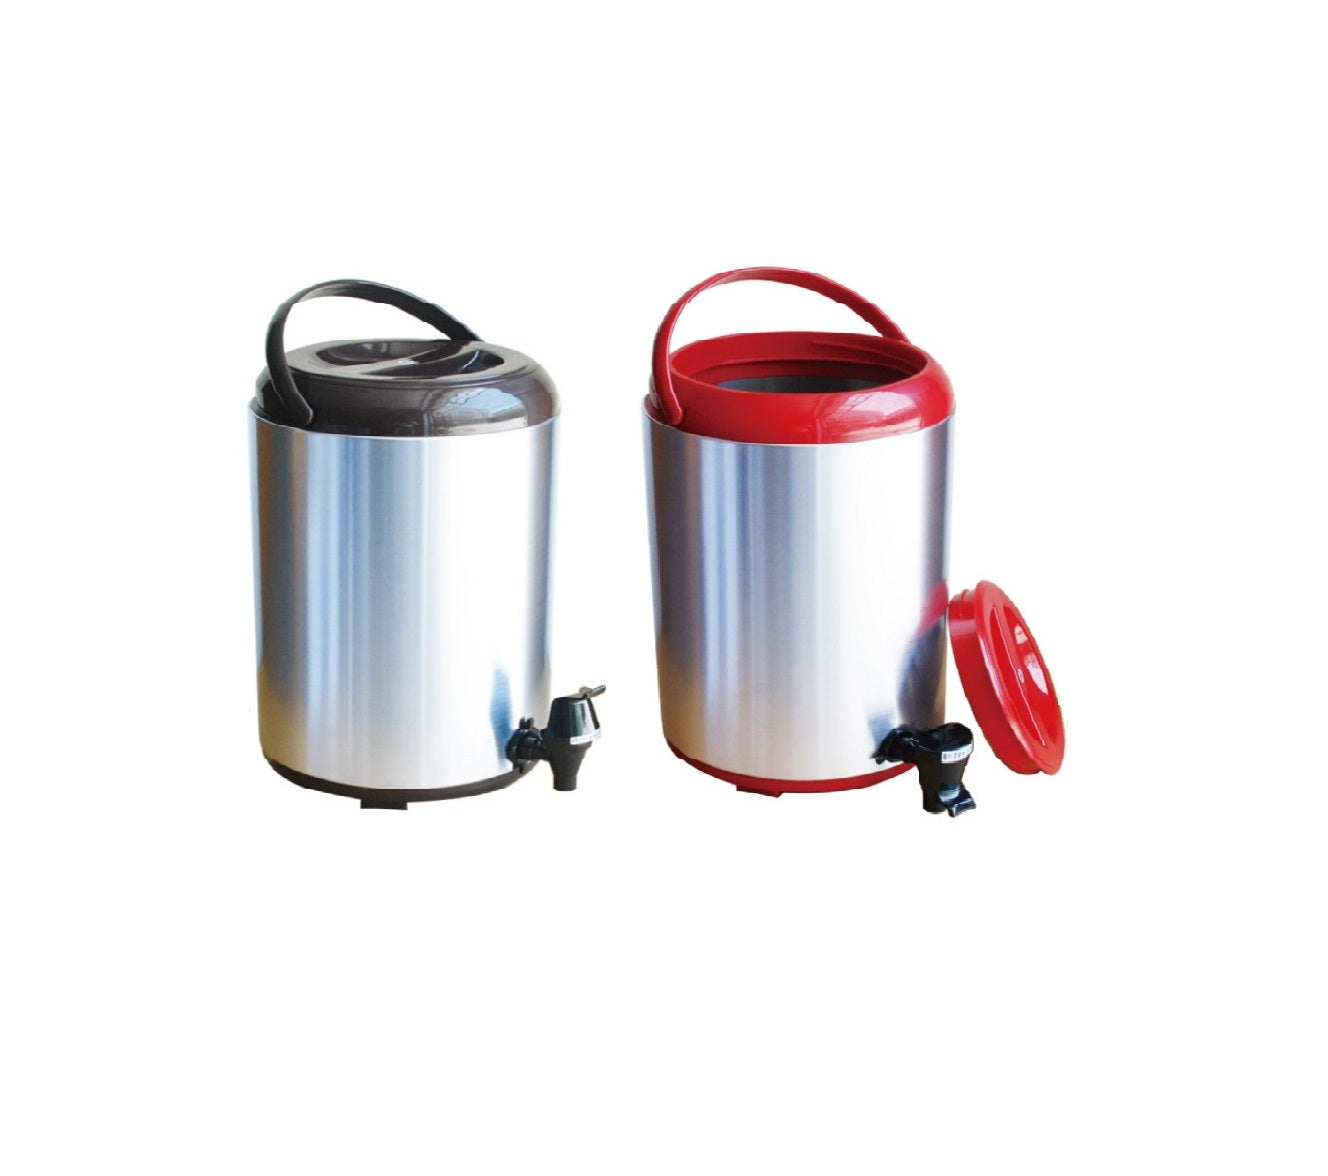 Thermos jug 8 liters - multiple colours available